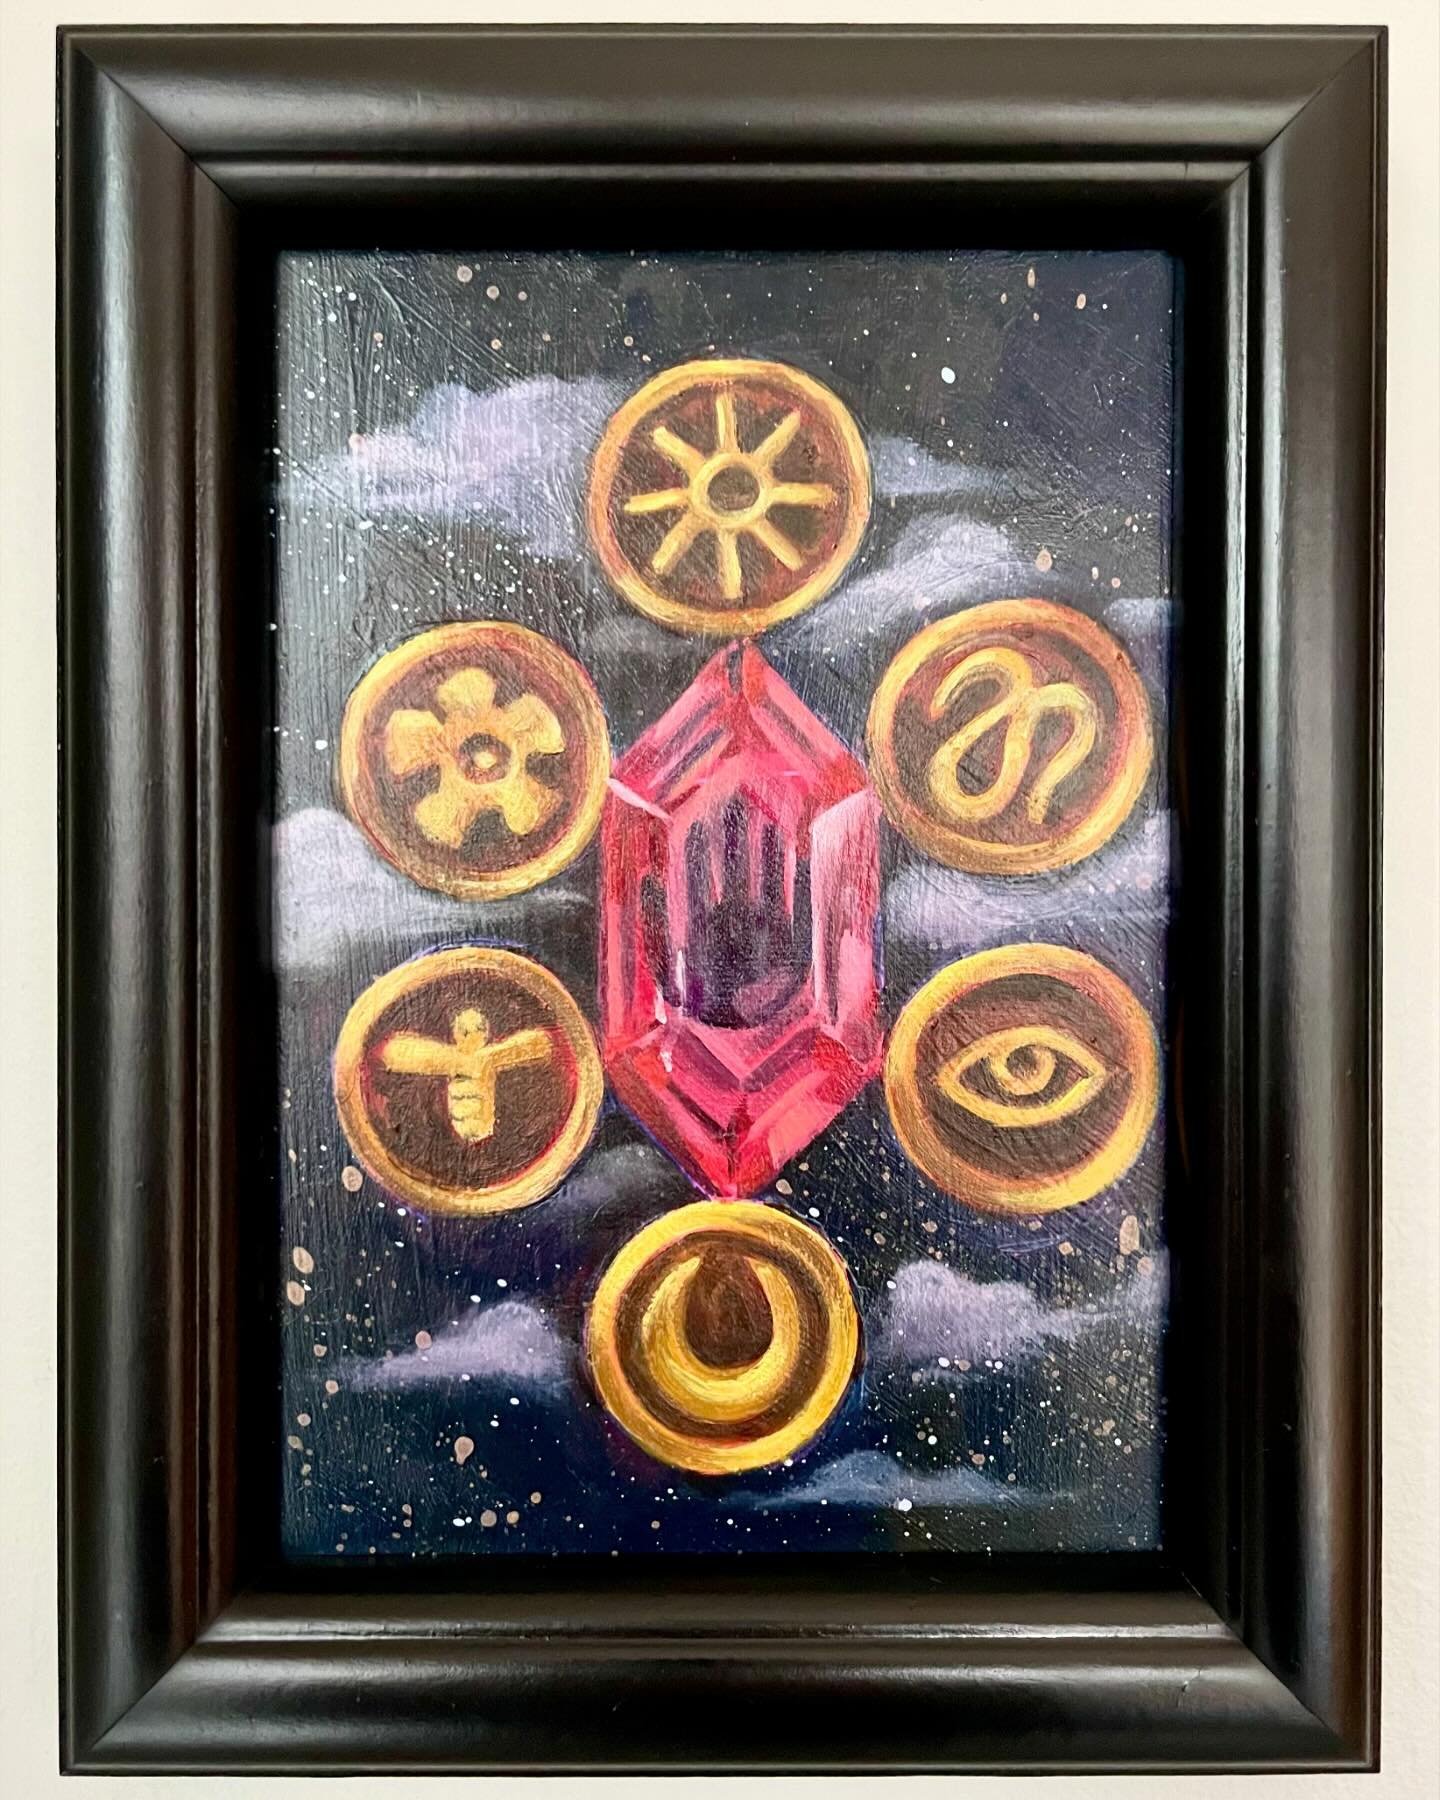 six of coins. an image from a dream, committed to panel with oil paint. a visual dream journal. a dream made real. this is magick. 

at @sidestreetartspdx very soon!

5&rdquo;x7&rdquo;
oil on panel
surrounded in a simple black frame